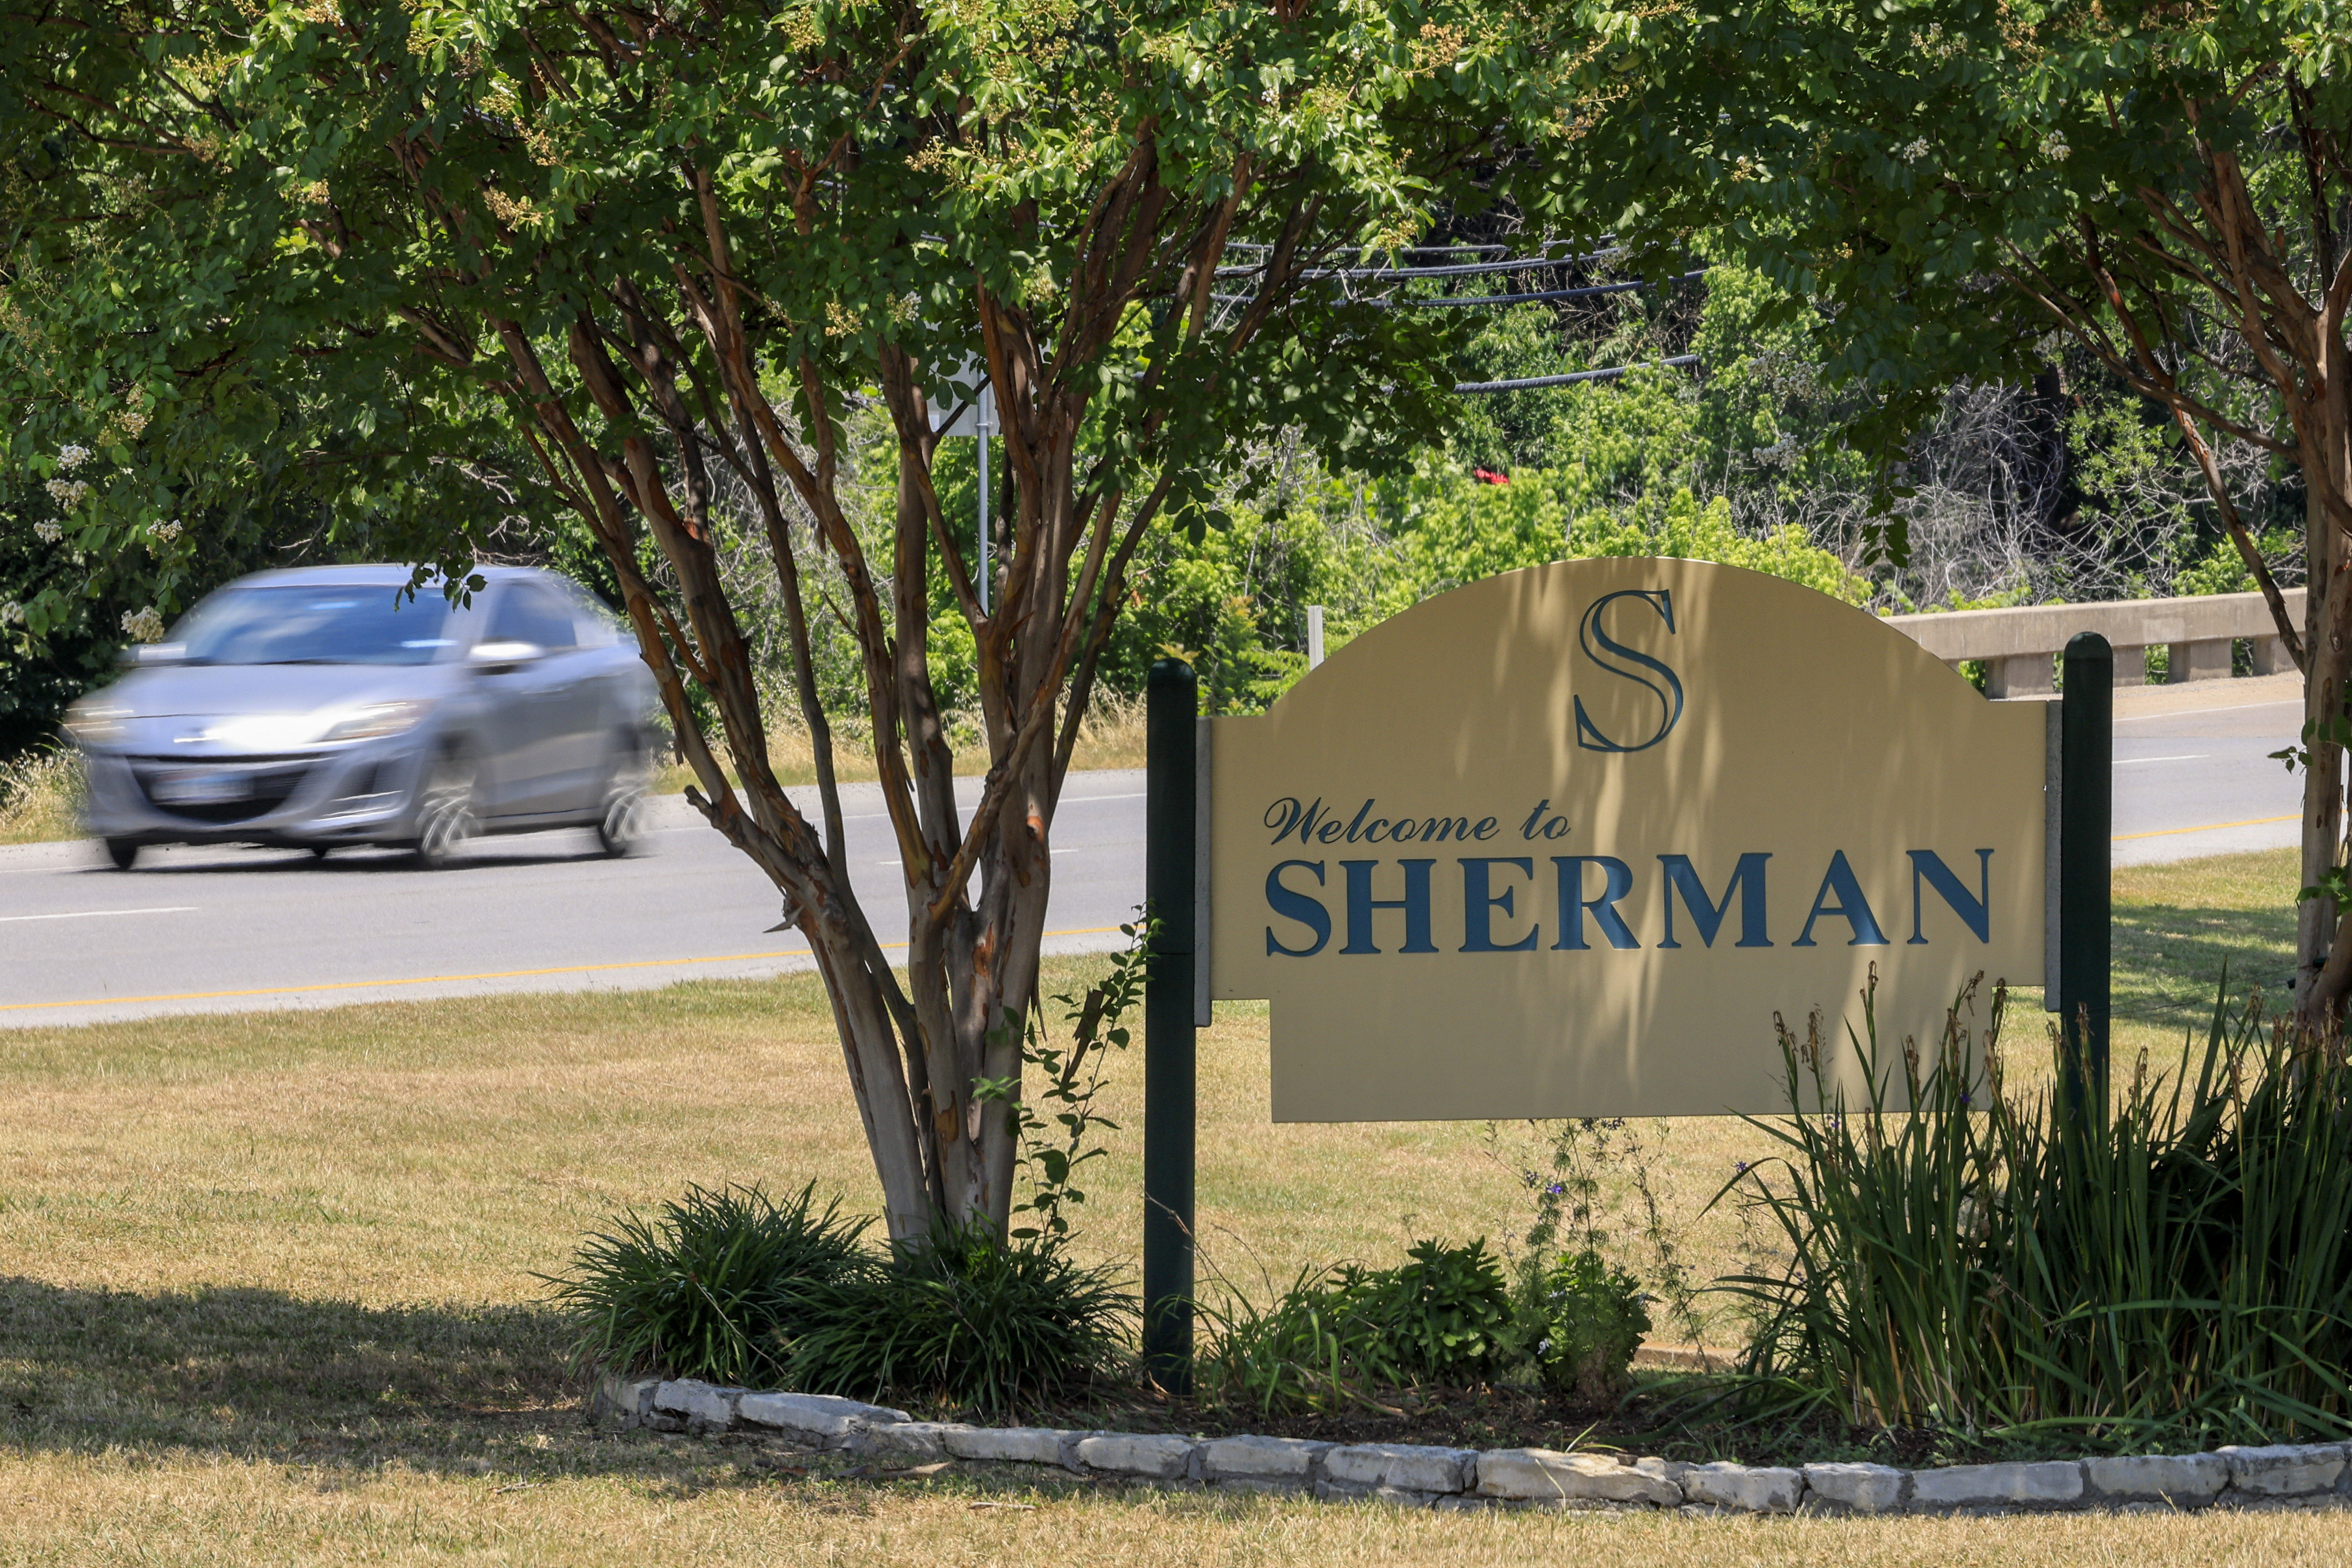 Higher Education is Within Reach in Sherman, Texas